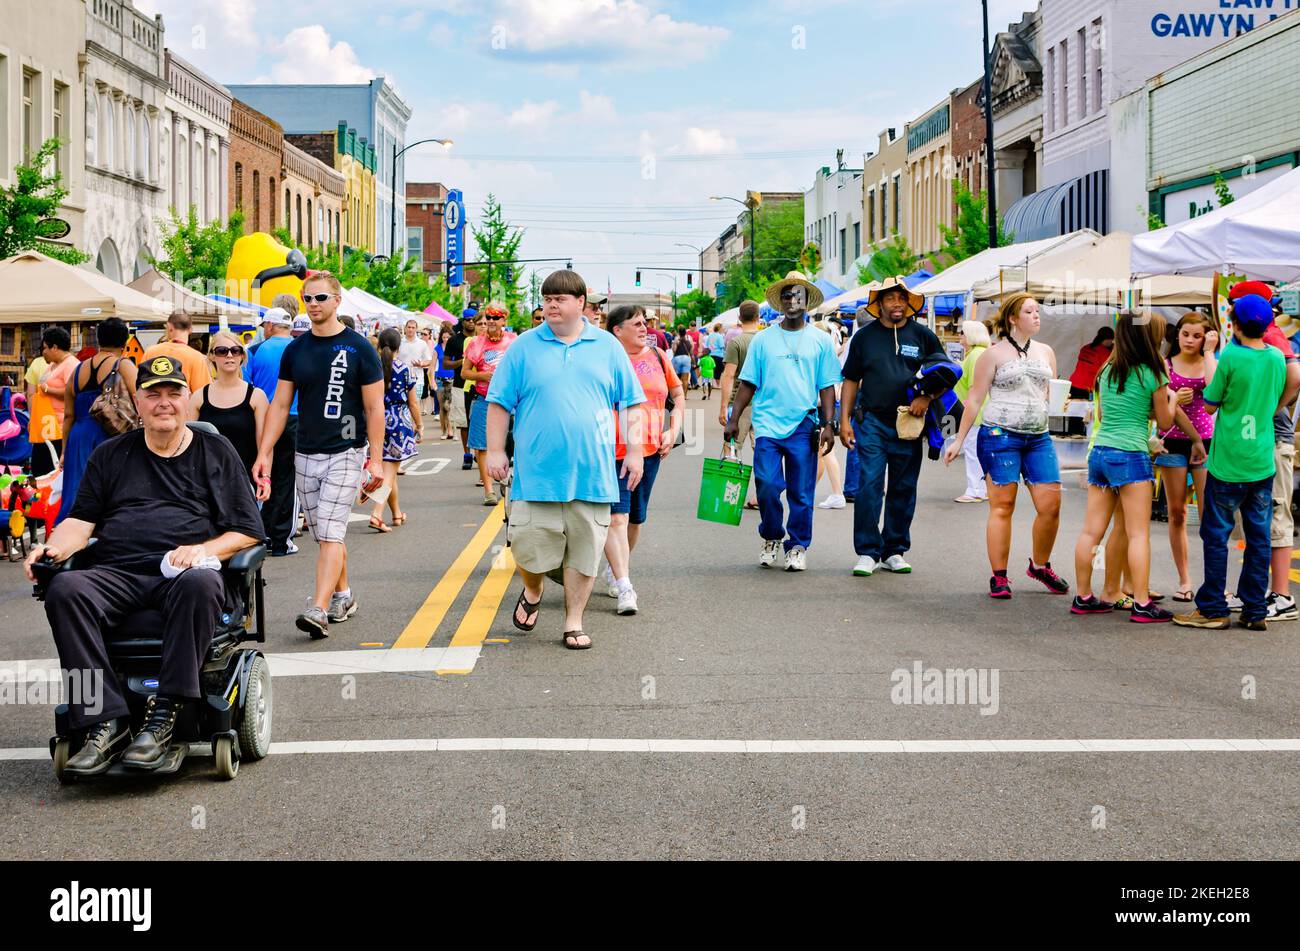 People walk past street vendors during the Market Street Festival, May 5, 2012, in Columbus, Mississippi. Stock Photo